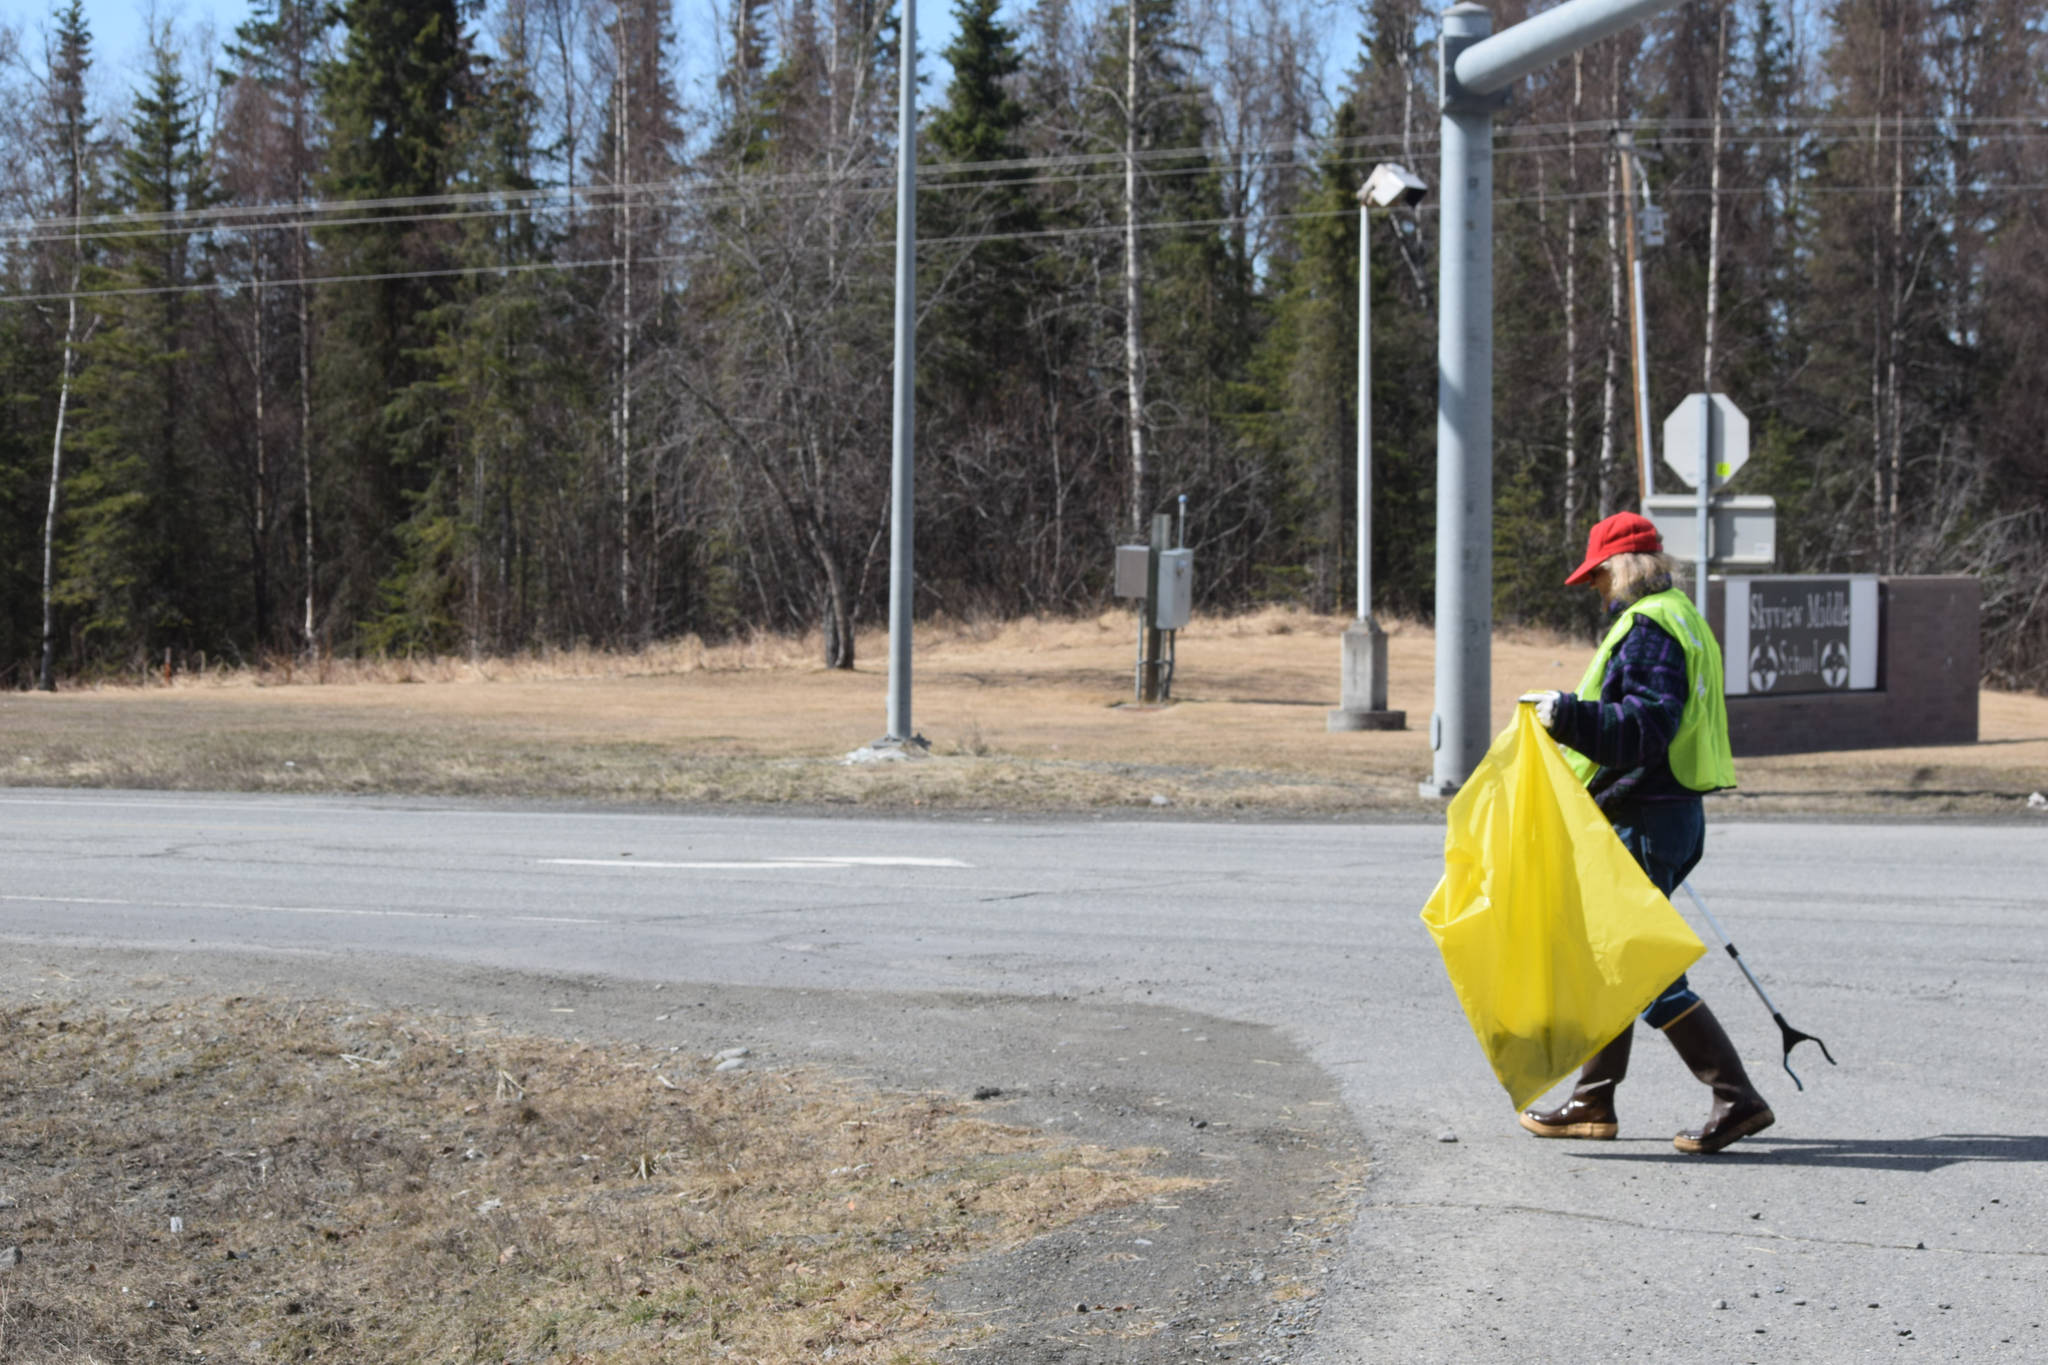 Friends of Alaska National Wildlife Refuge Vice President and Outreach Chair Poppy Benson collects litter from the side of the highway at the refuge in Soldotna, Alaska on Friday, April 30, 2021. (Camille Botello / Peninsula Clarion)